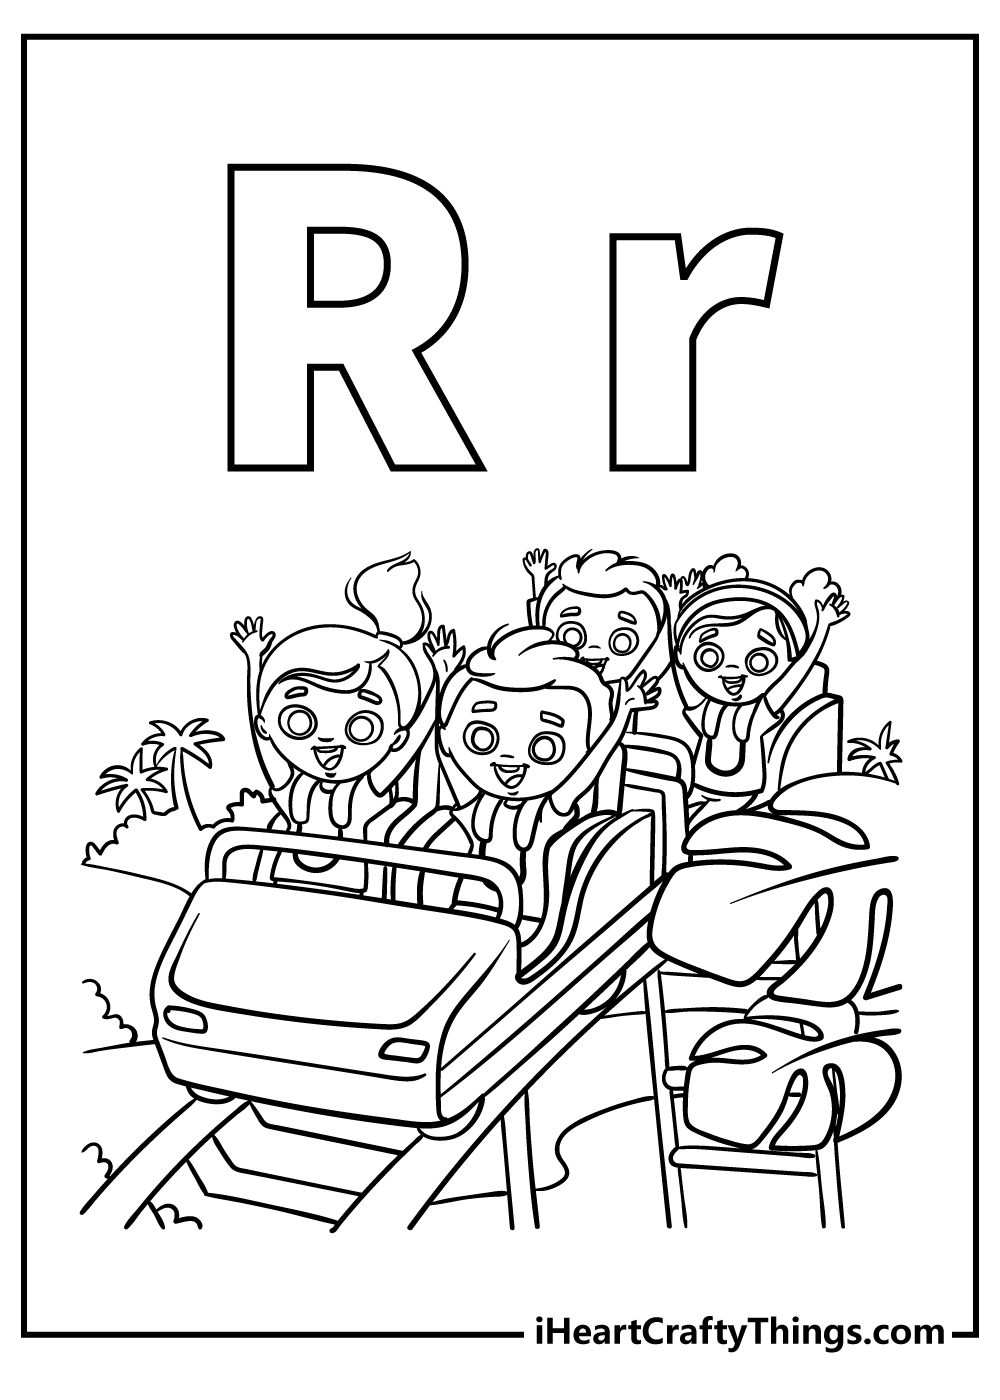 Letter R Coloring Book for kids free printable